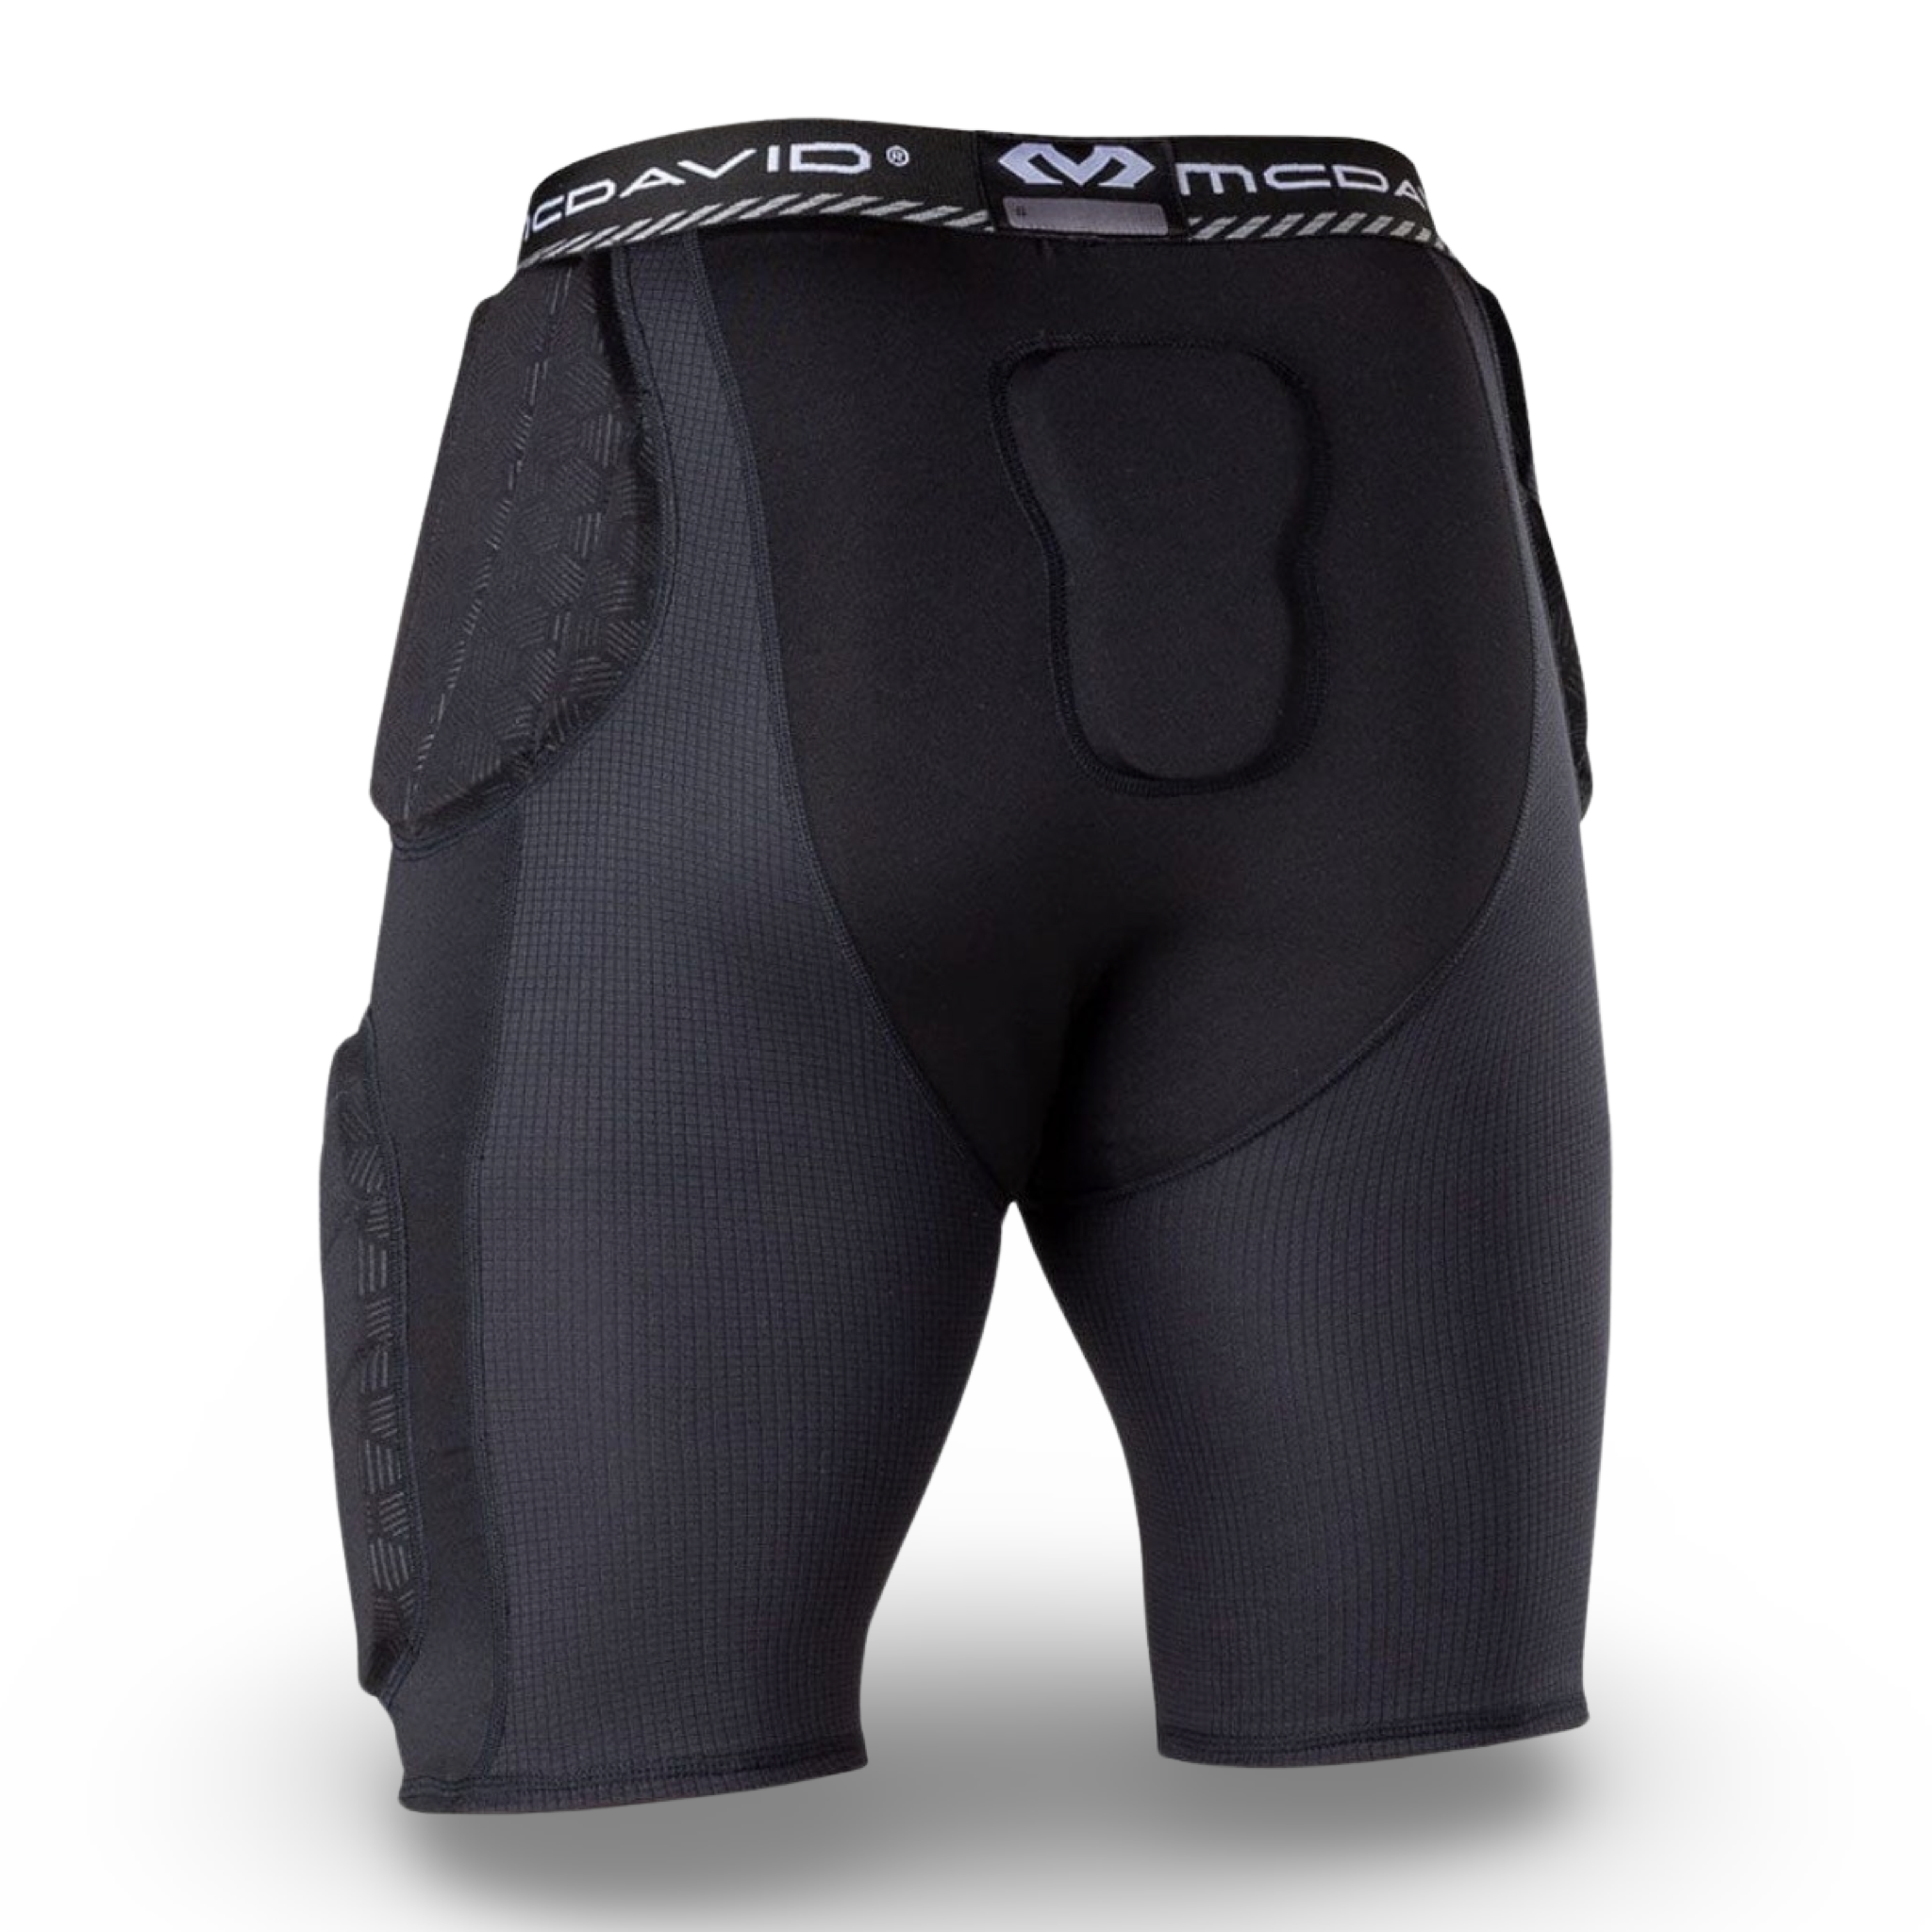 MD Rival™ 5-Pad Football Girdle - Adult